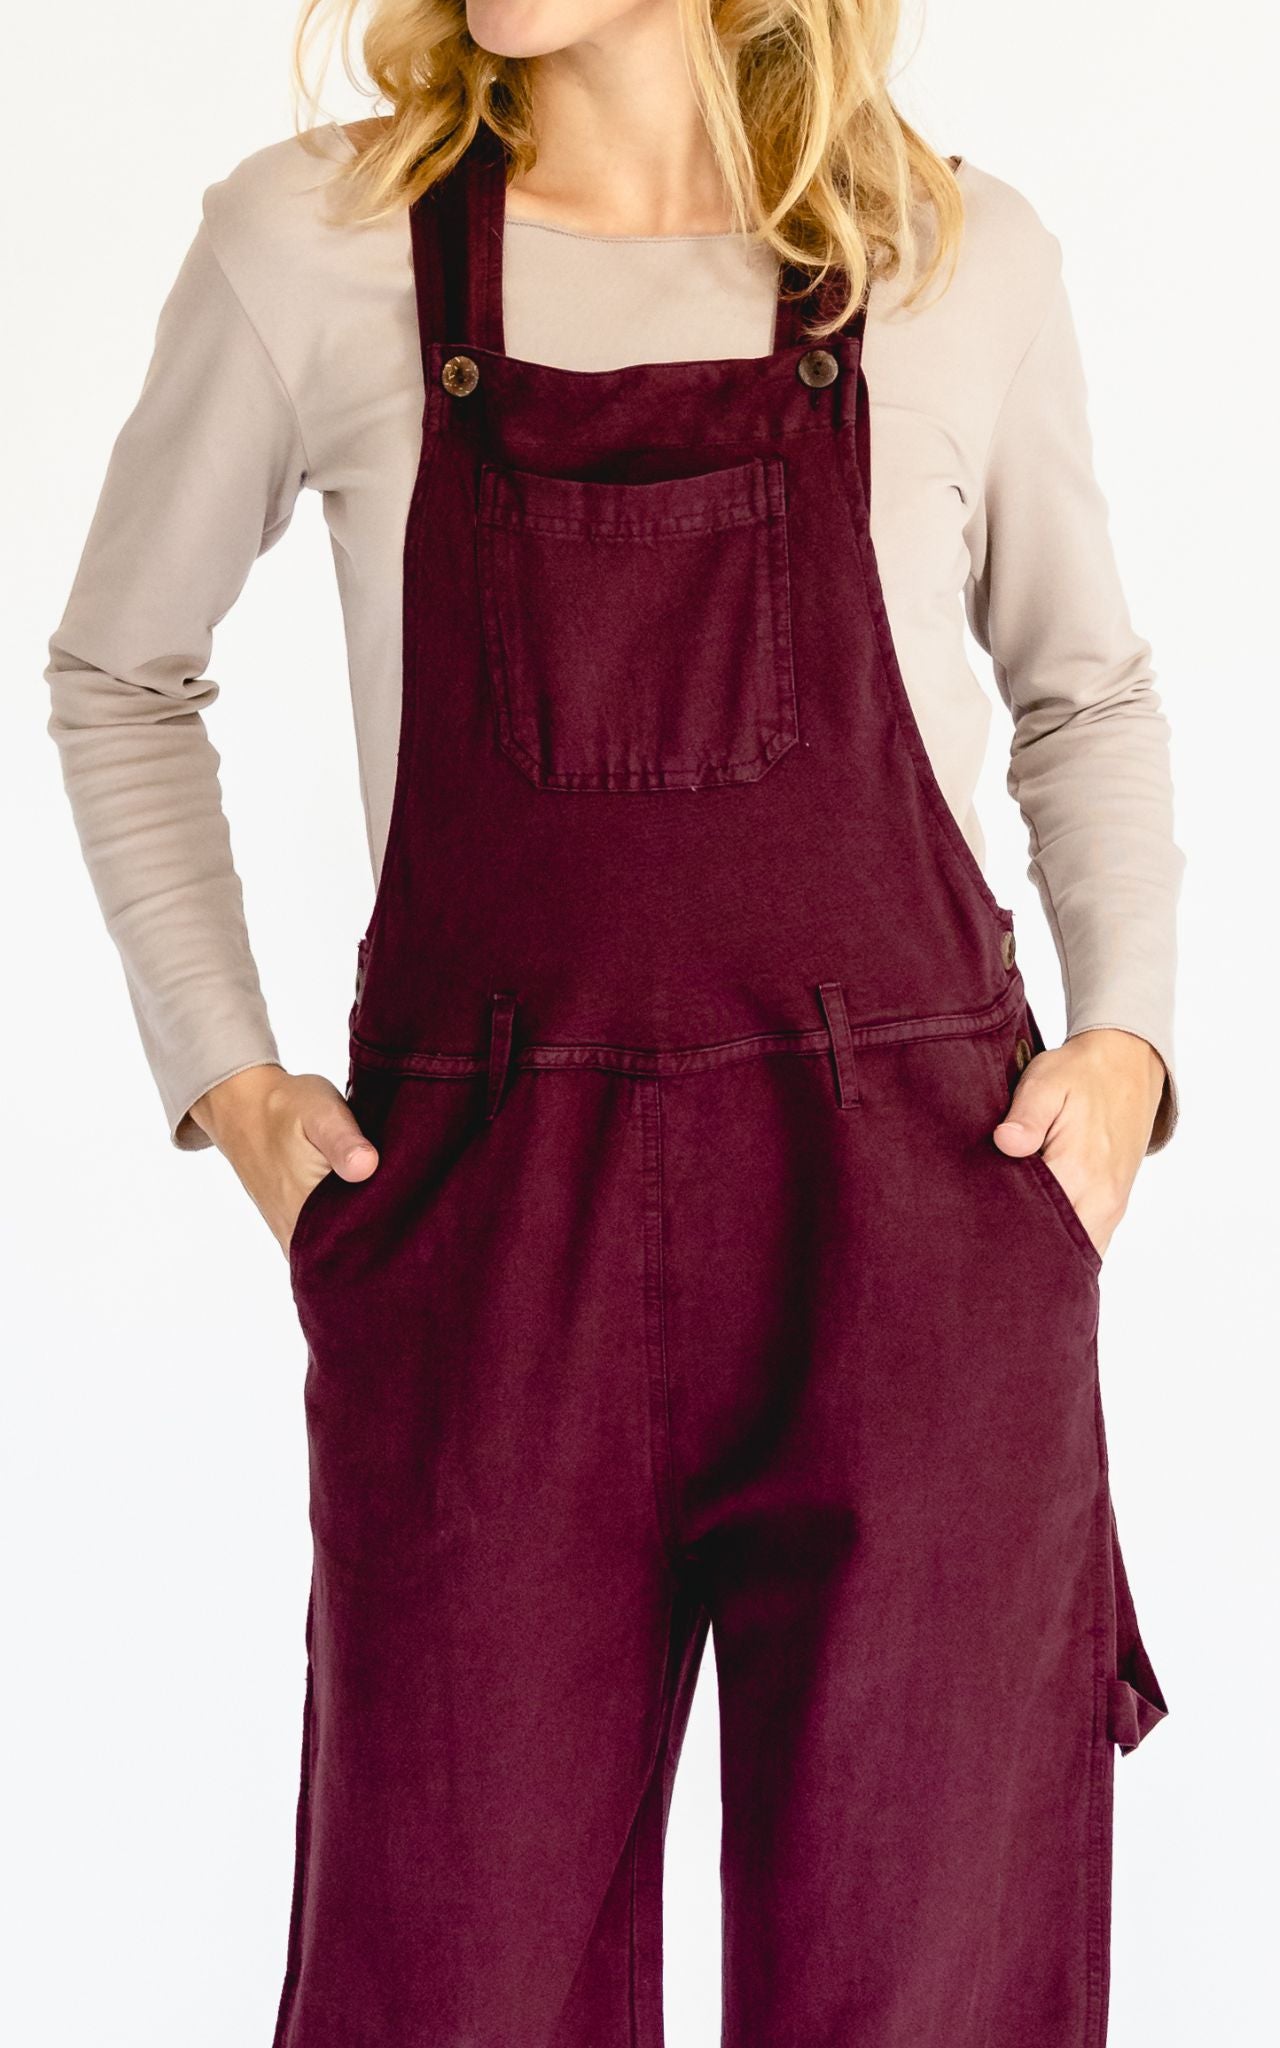 Surya Australia Ethical Classic Cotton Work Overalls from Nepal - Berry